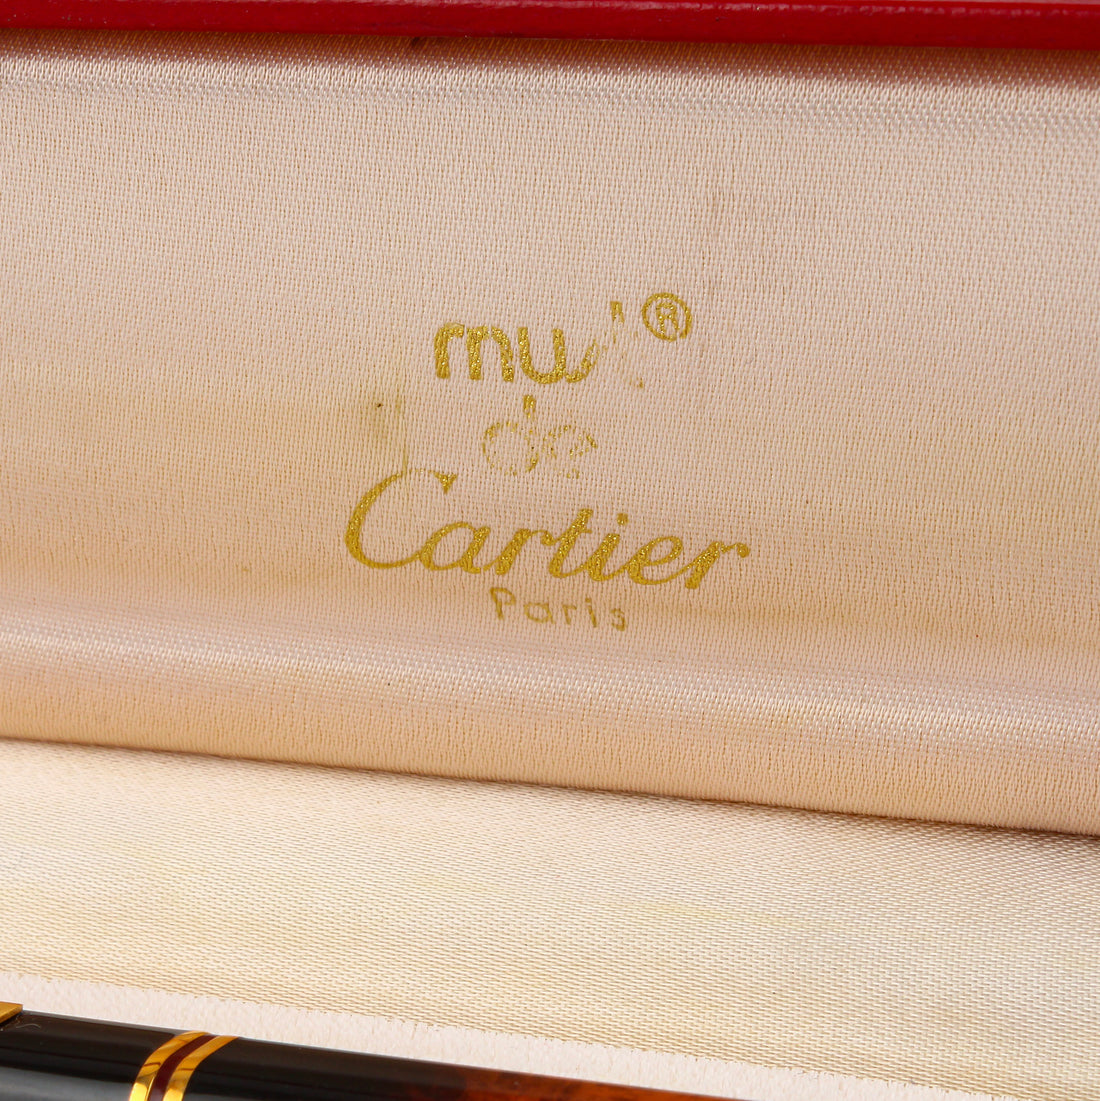 CARTIER Gold-Plated Vendome Trinity Ballpoint Pen - Marble Lacquer